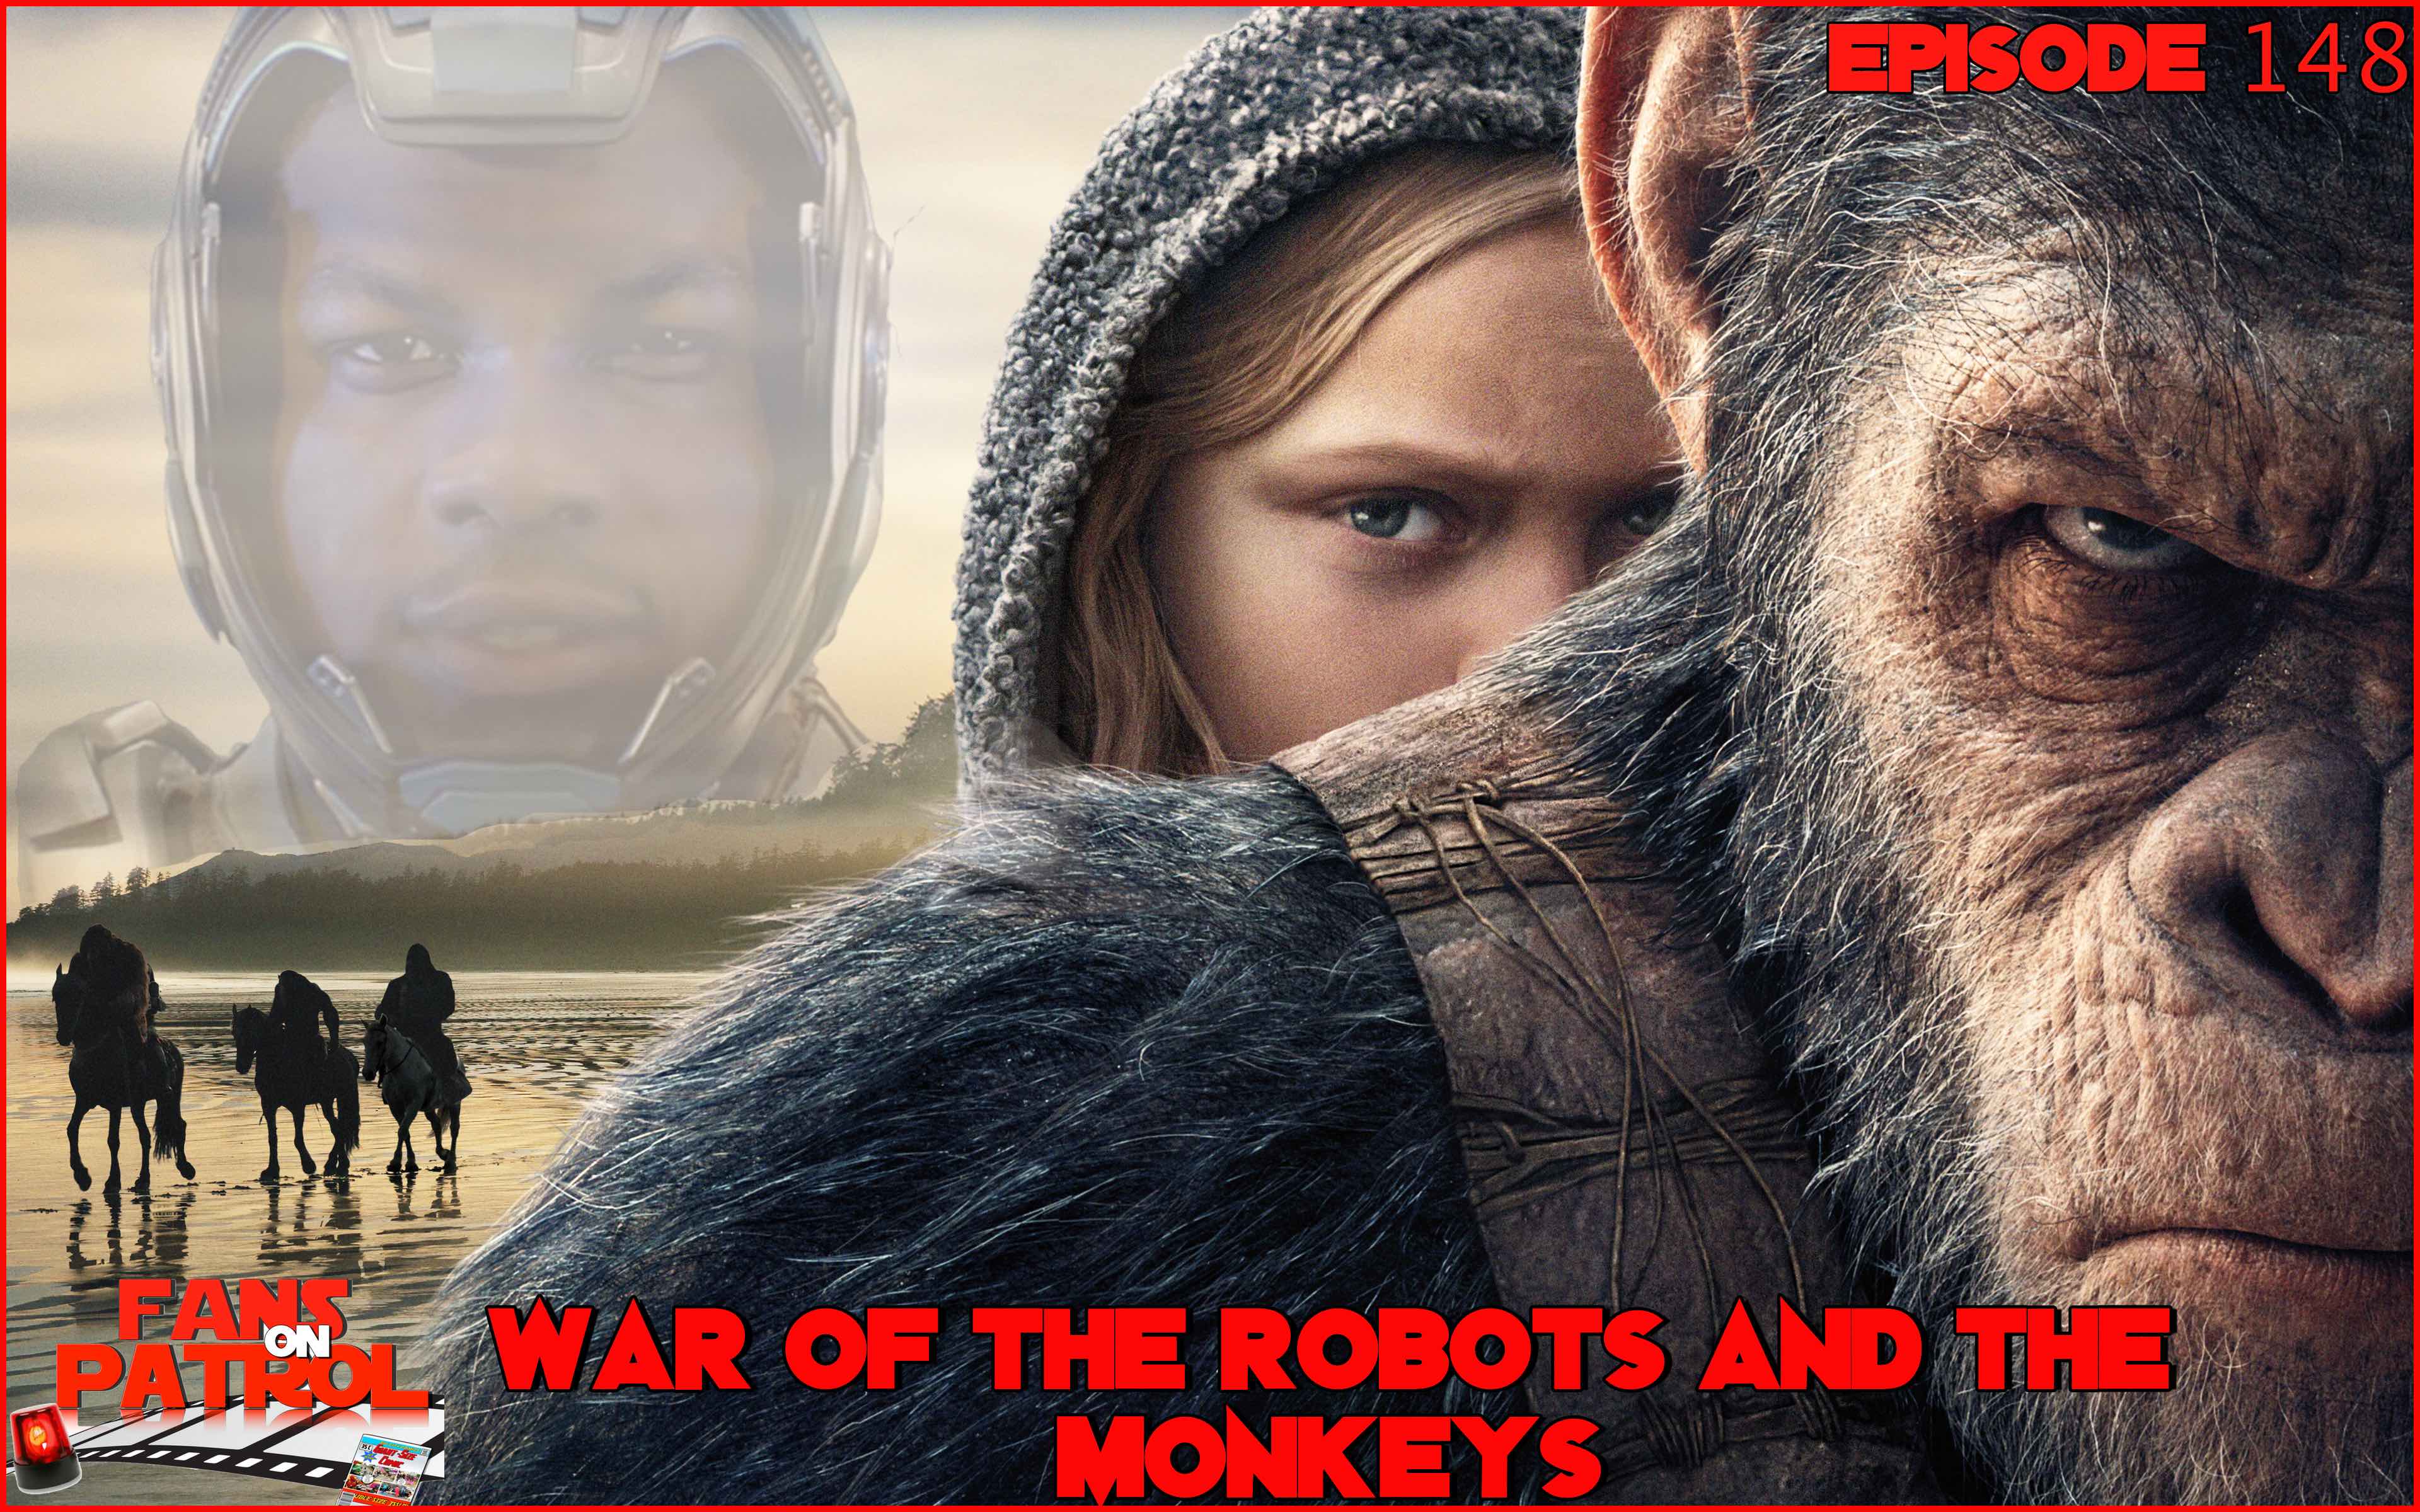 War of the Robots and the Monkeys Episode 148